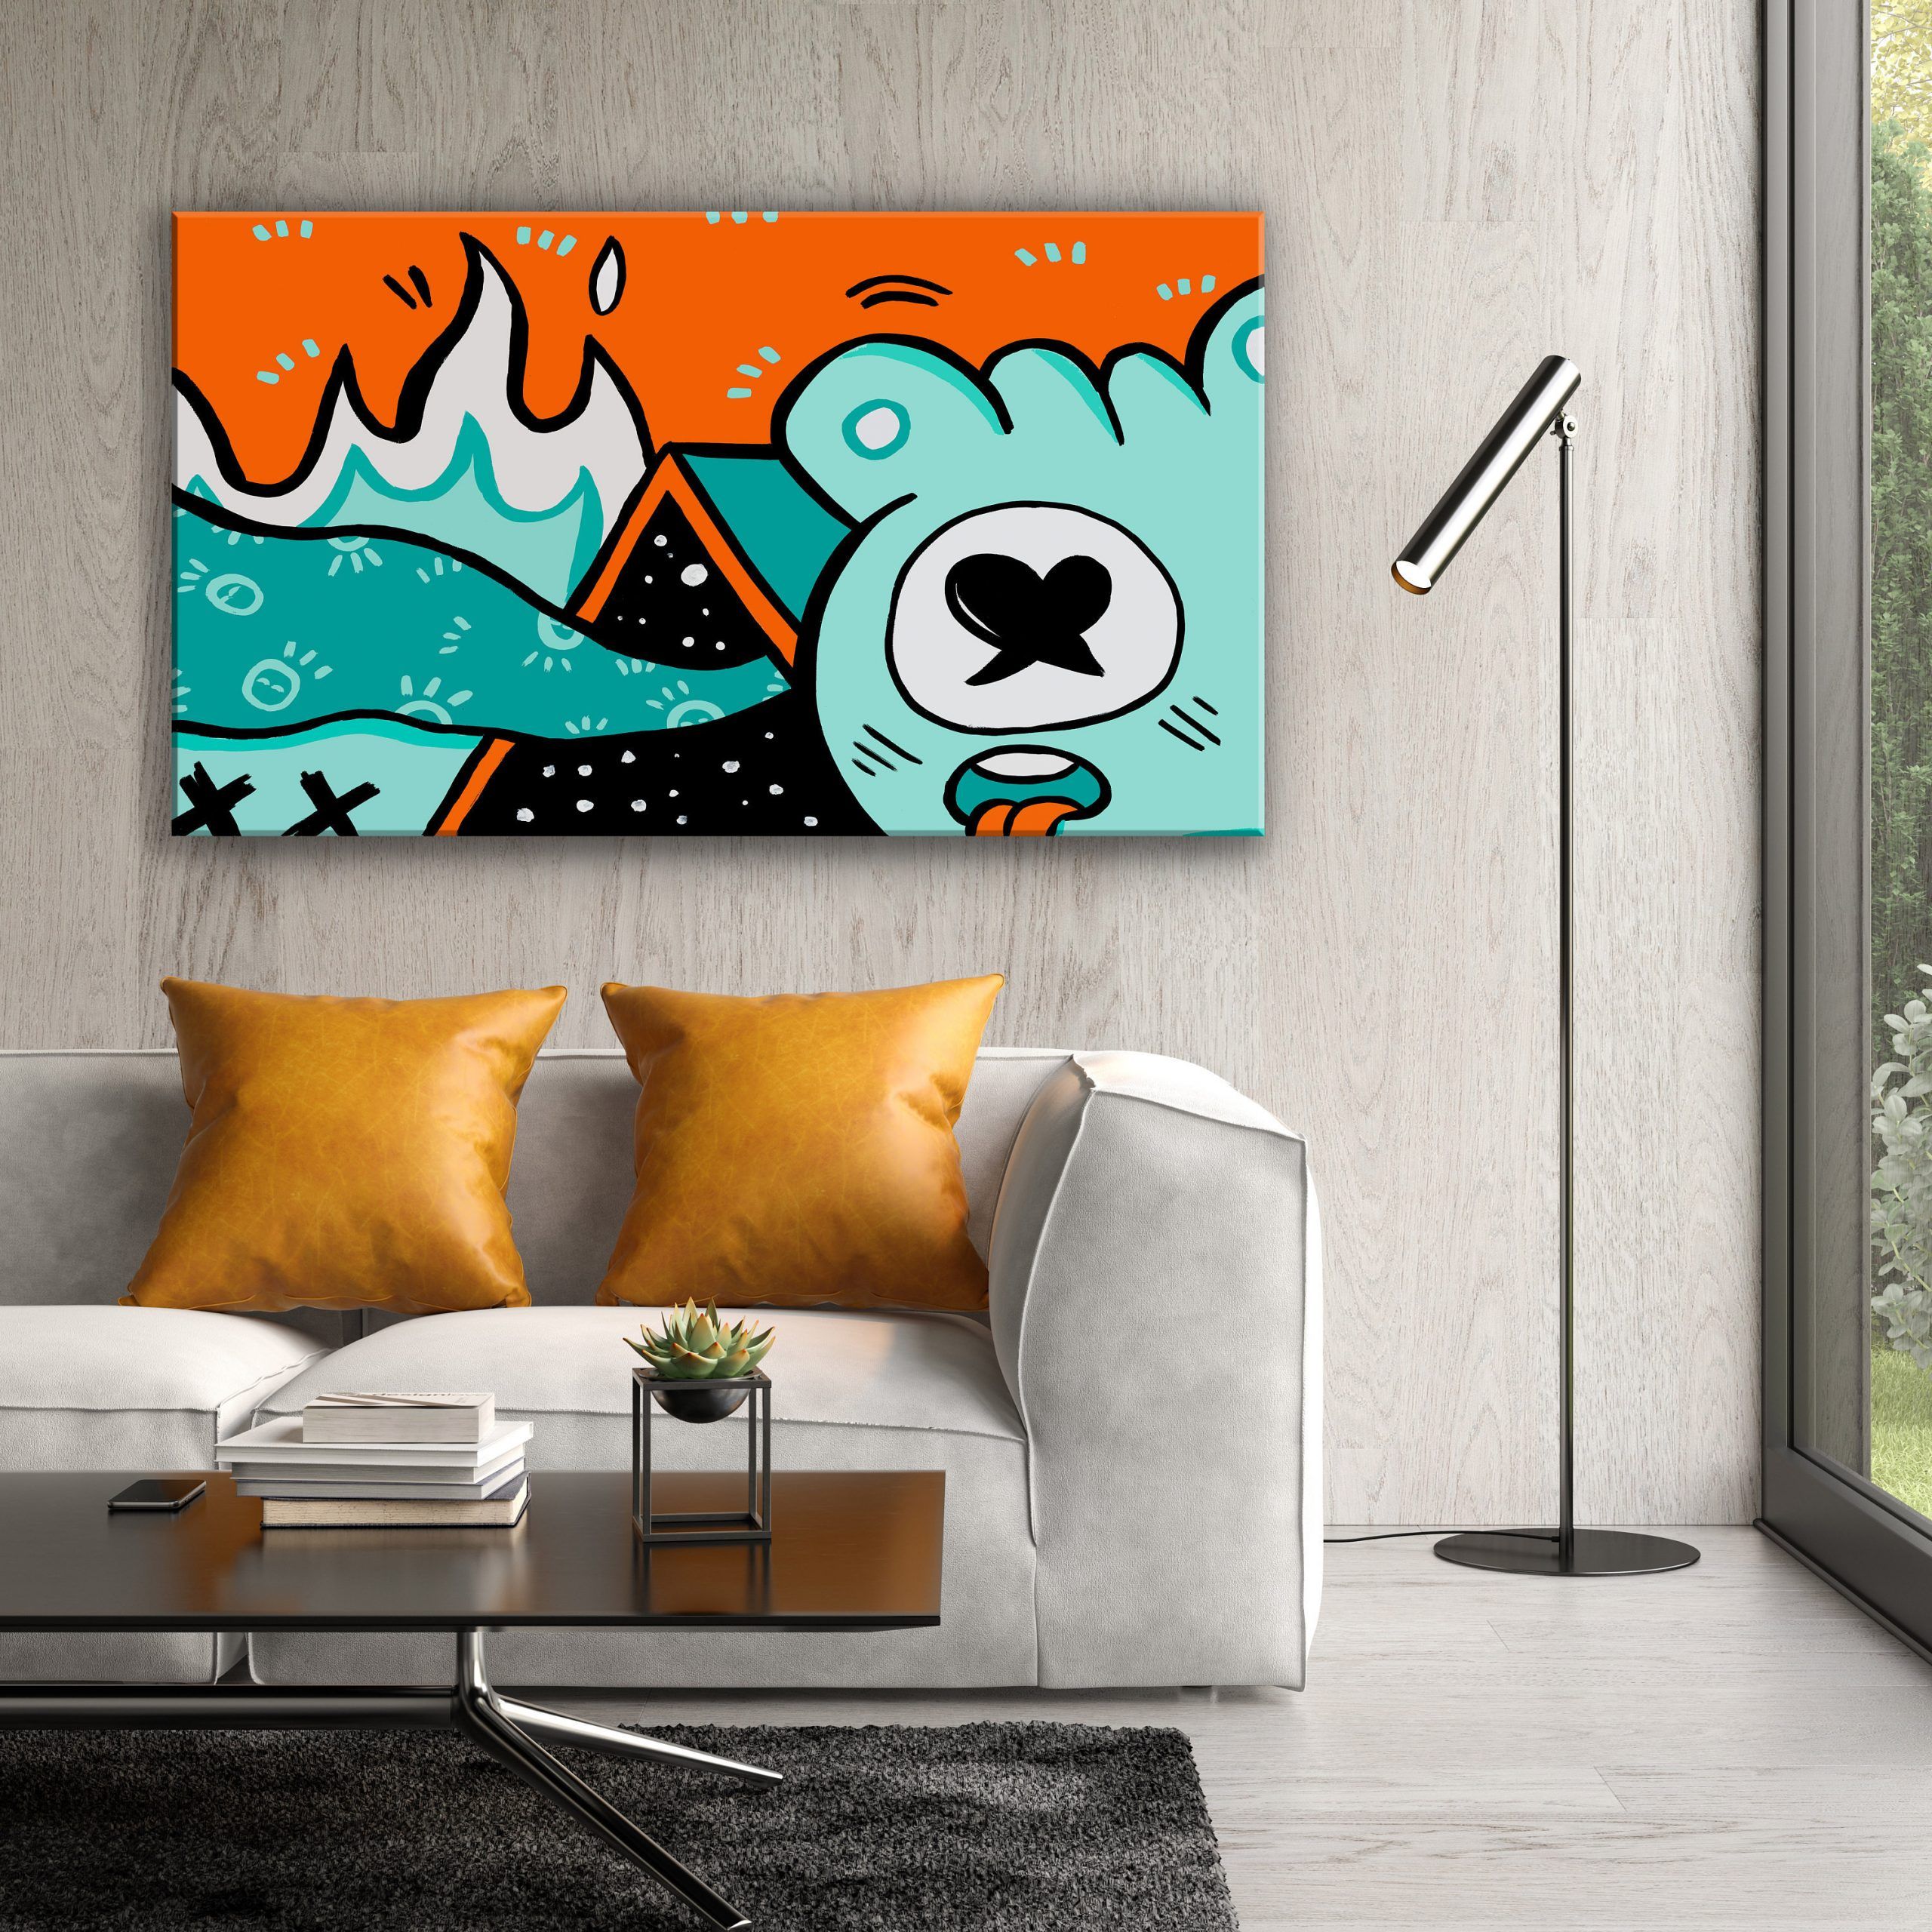 Large Pop Art Graffiti Style Wall Art Canvas Art Print – Etsy Uk In Most Recently Released Graffiti Style Wall Art (View 17 of 20)